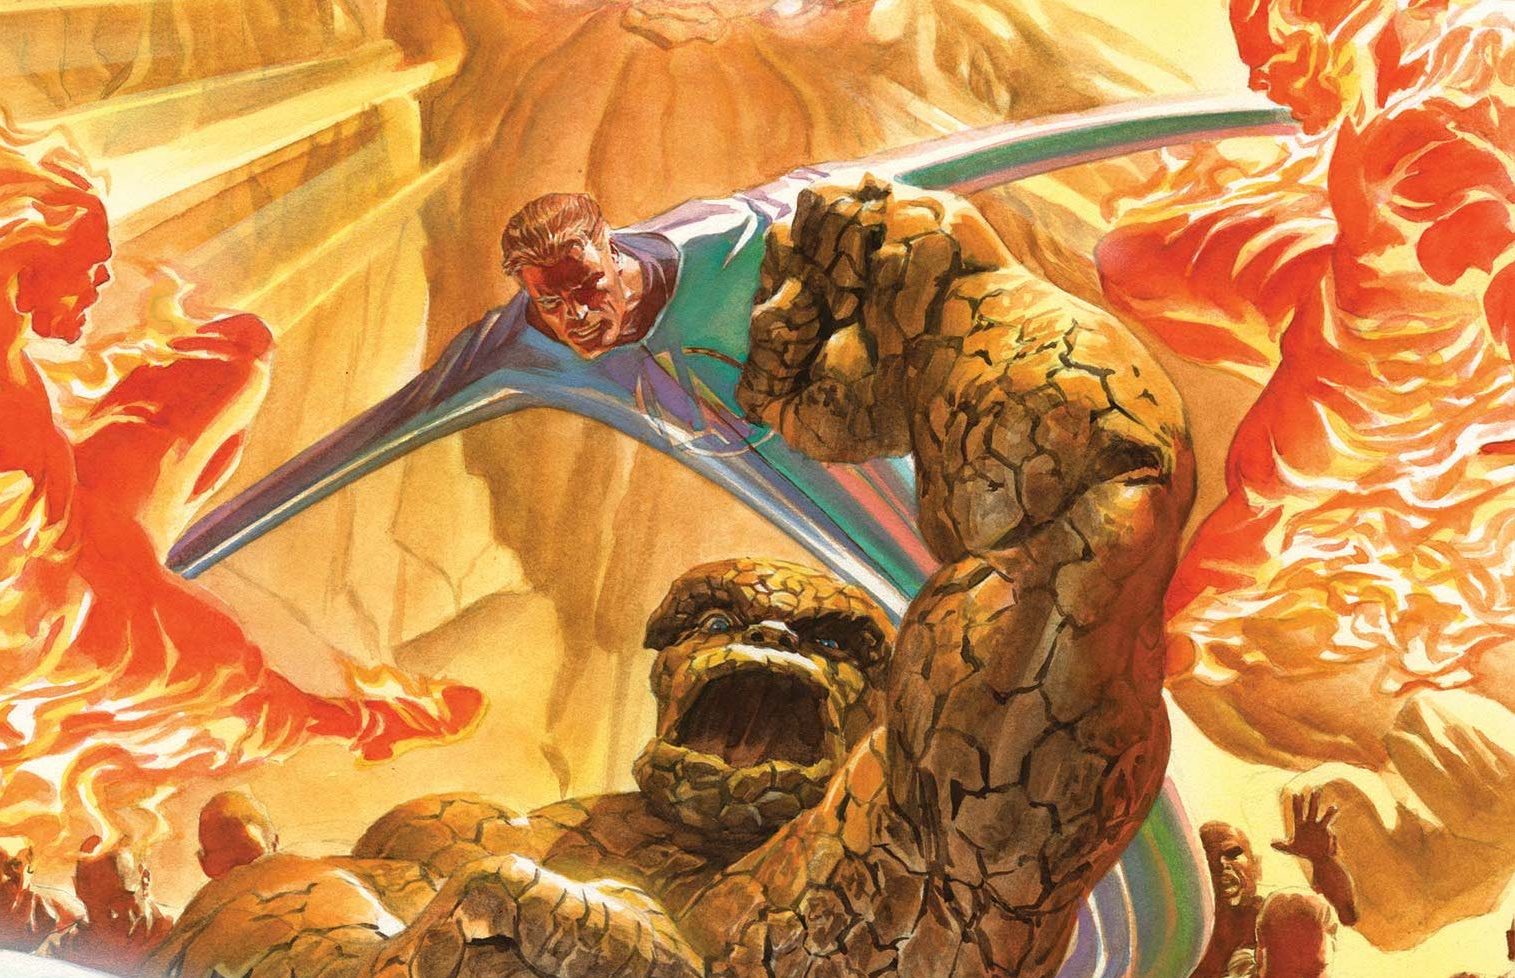 'Fantastic Four Vol. 2: Four Stories About Hope' is must-read comics